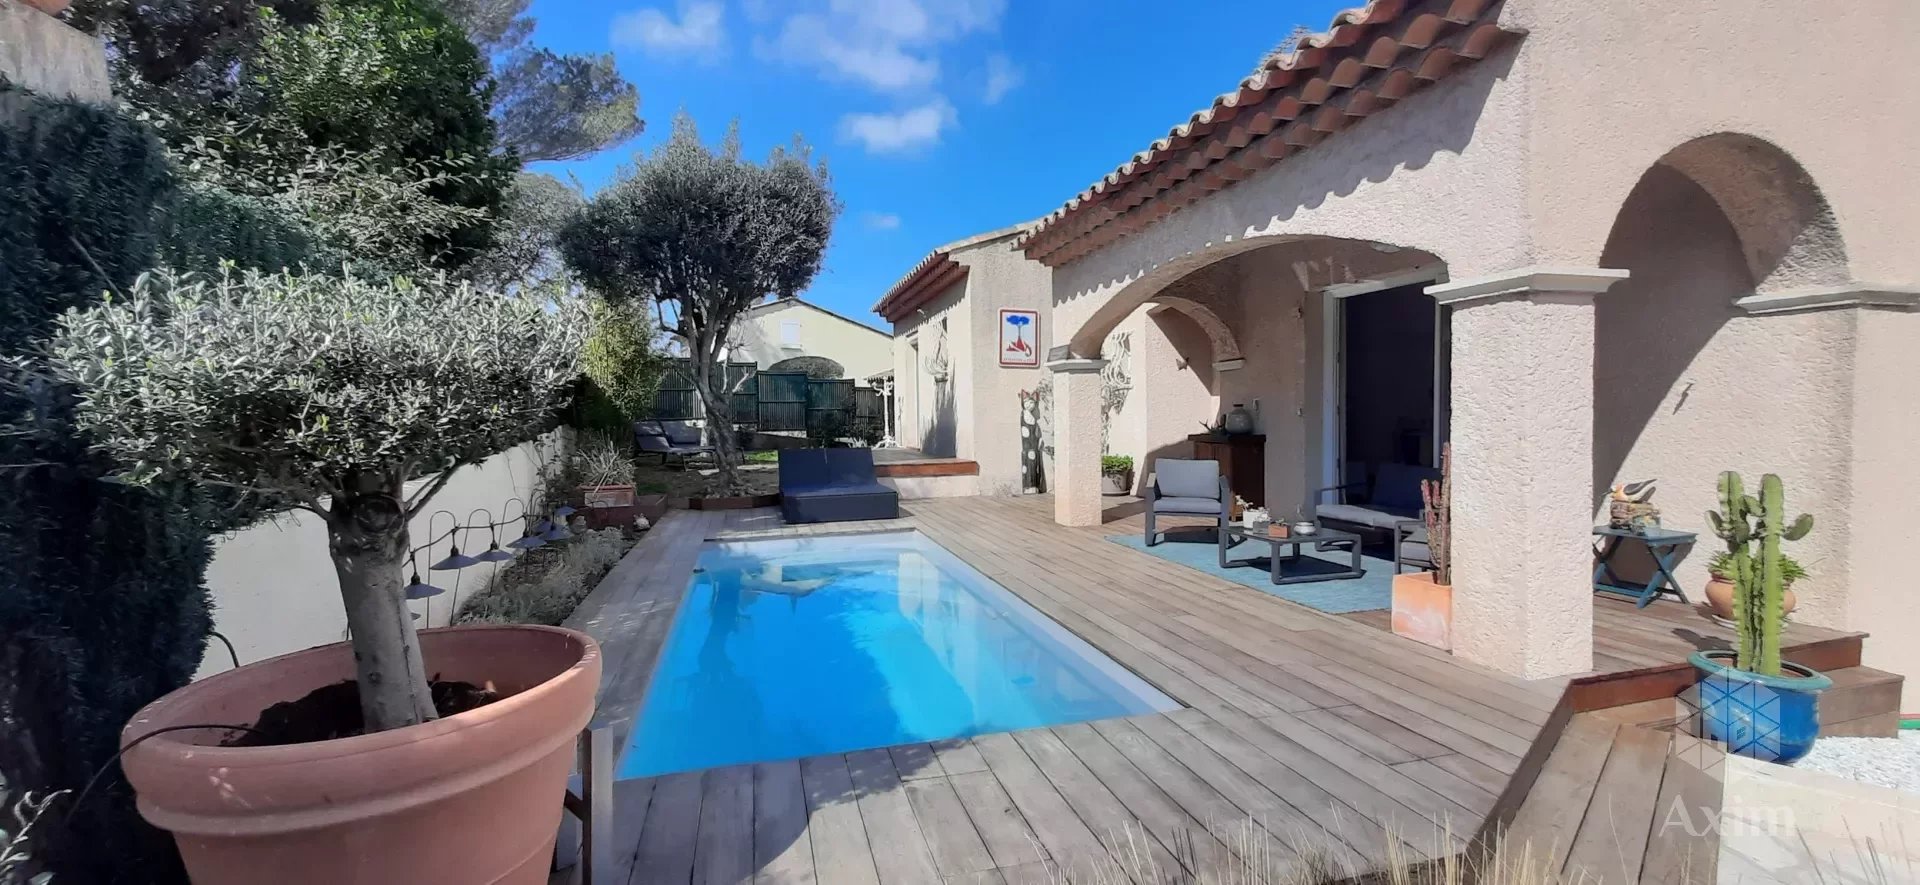 Villa 3/4 bedrooms with heated pool ideally located!